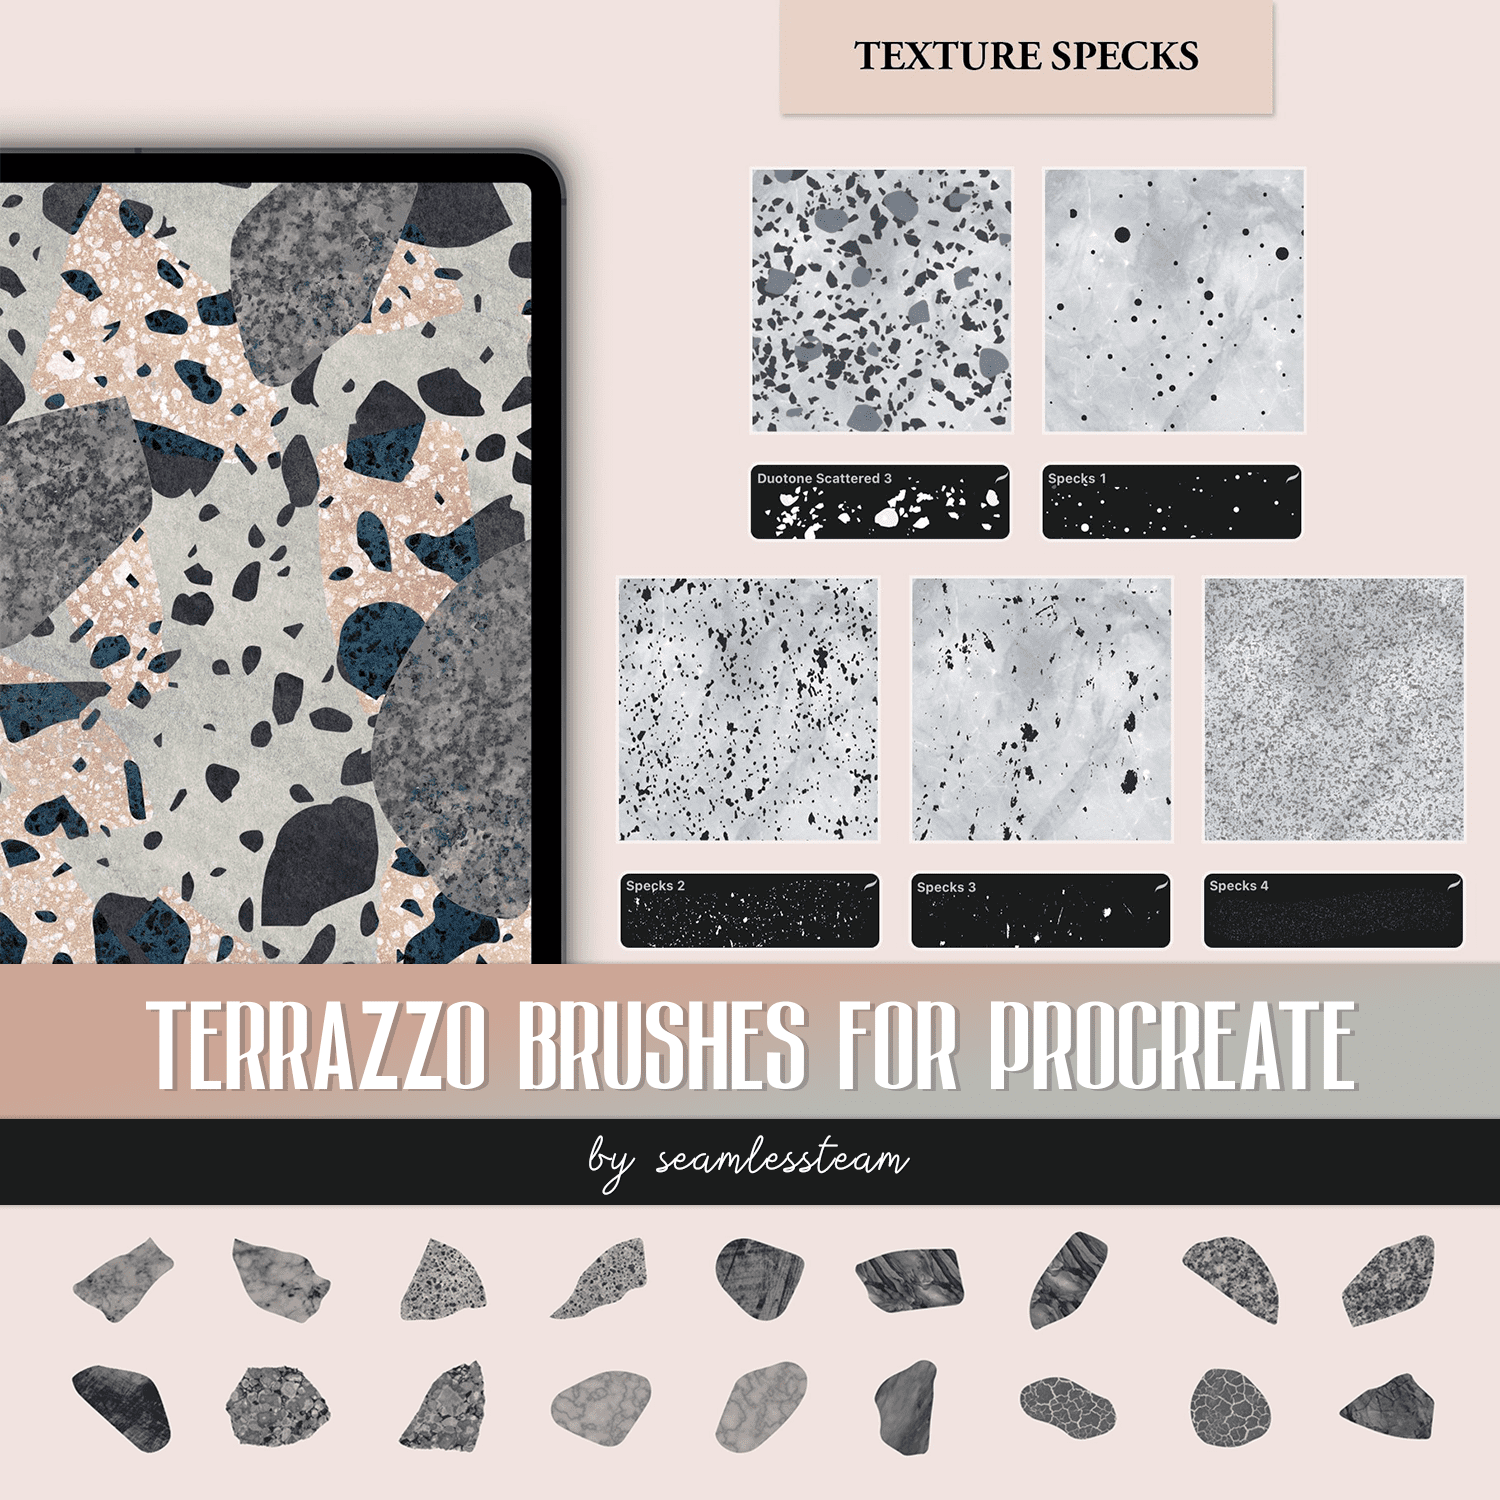 Terrazzo Brushes For Procreate created by seamlessteam.